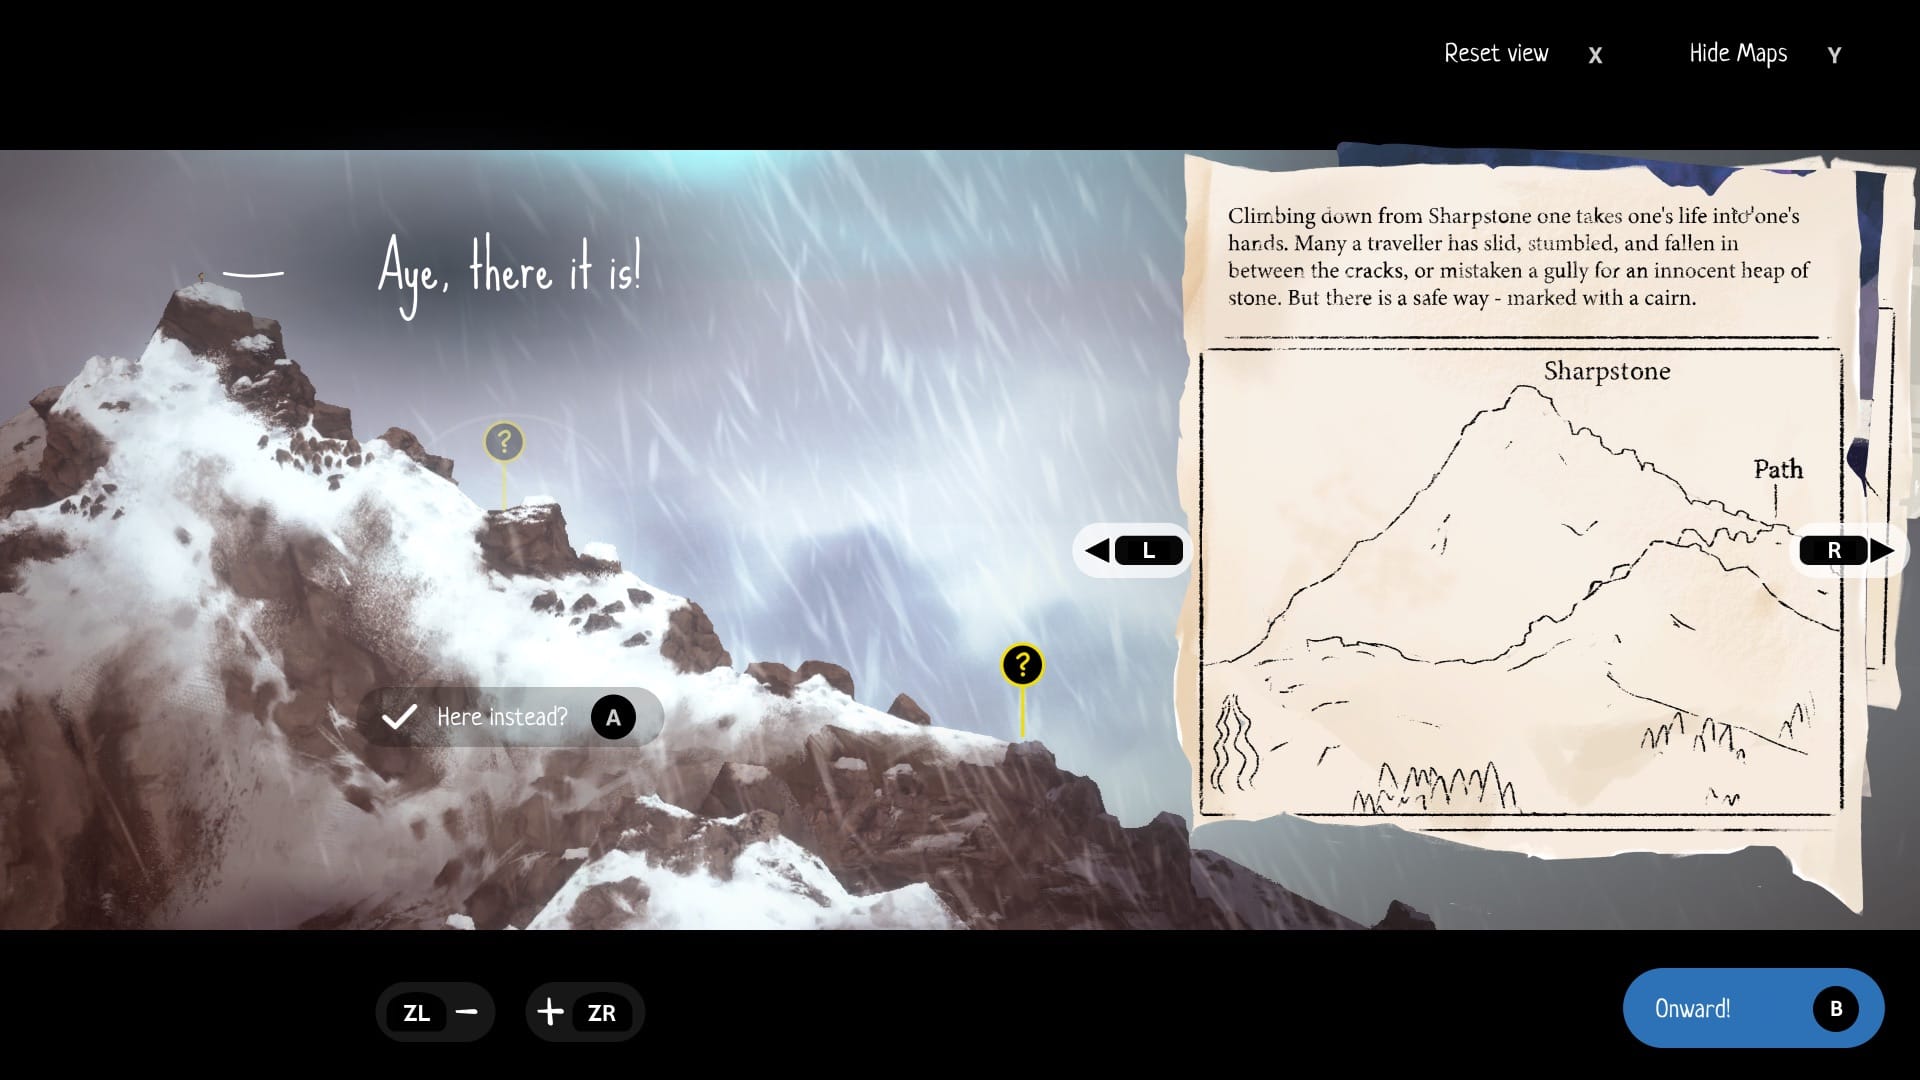 A screenshot from A HIghland Song of showing a map fragment with a prompt that asks "Here, instead?"